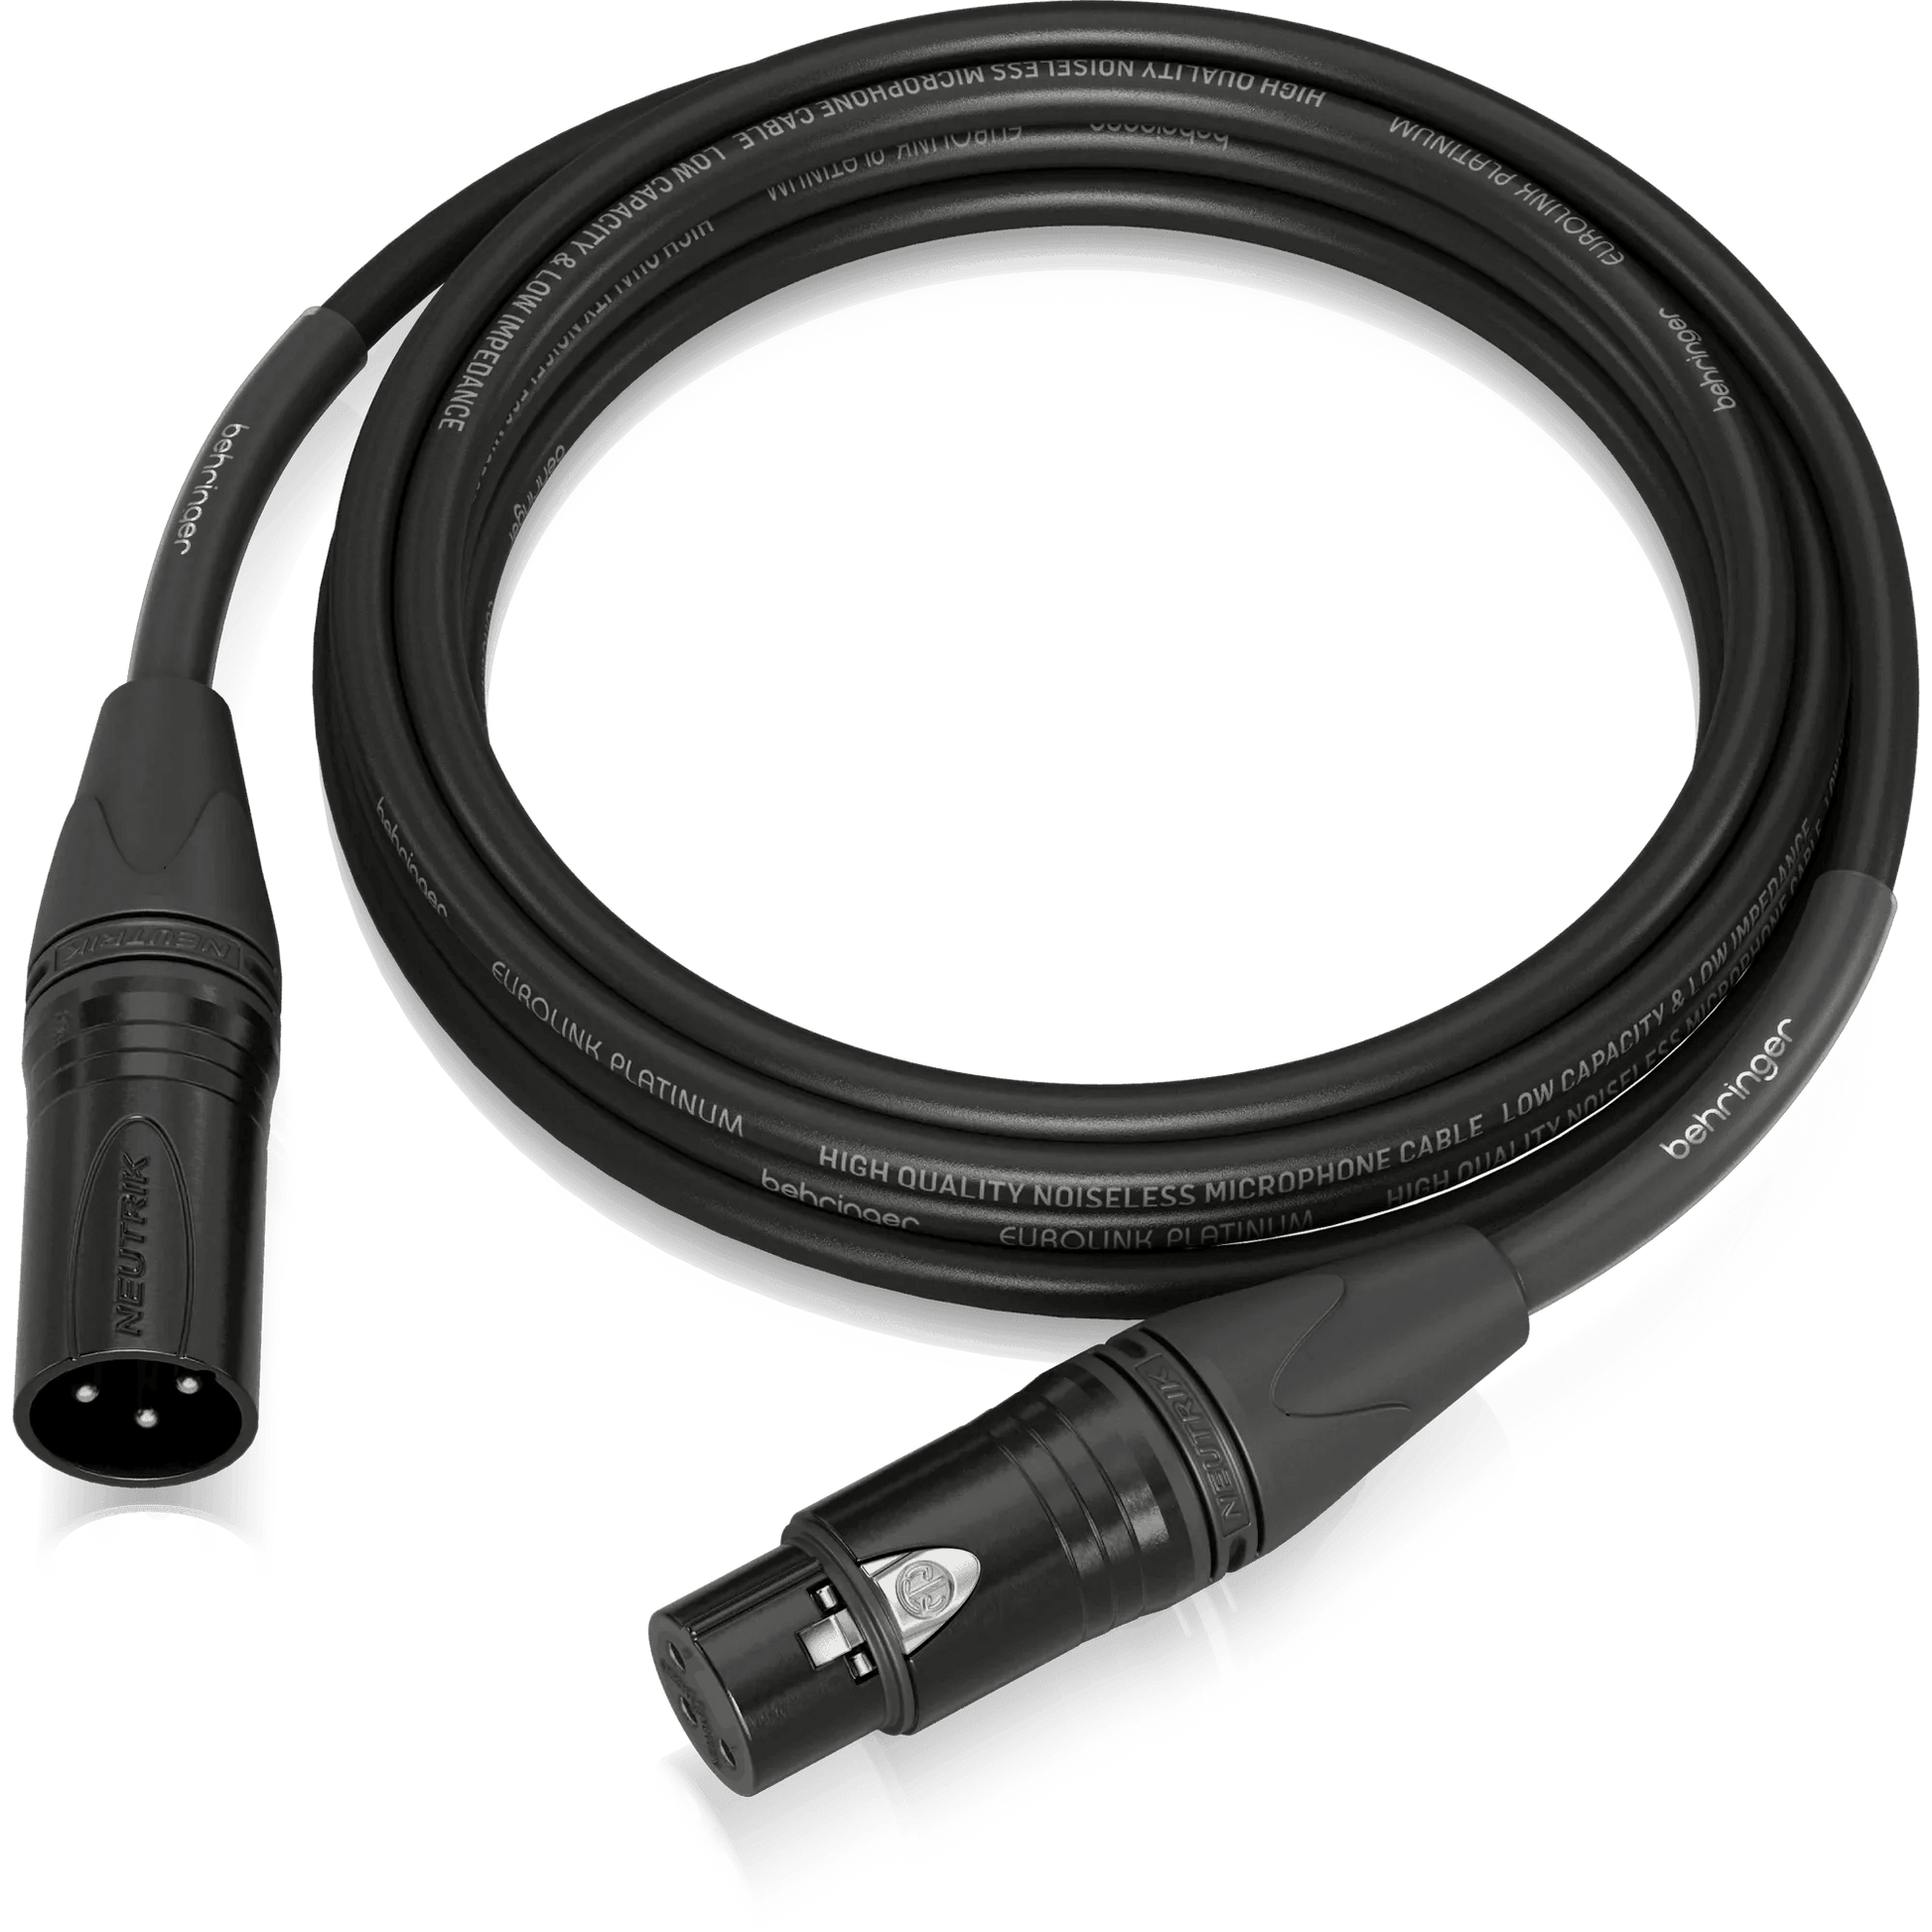 Behringer PMC-500 Platinum Performance 5 m (16.4 ft) Microphone Cable with XLR Connectors